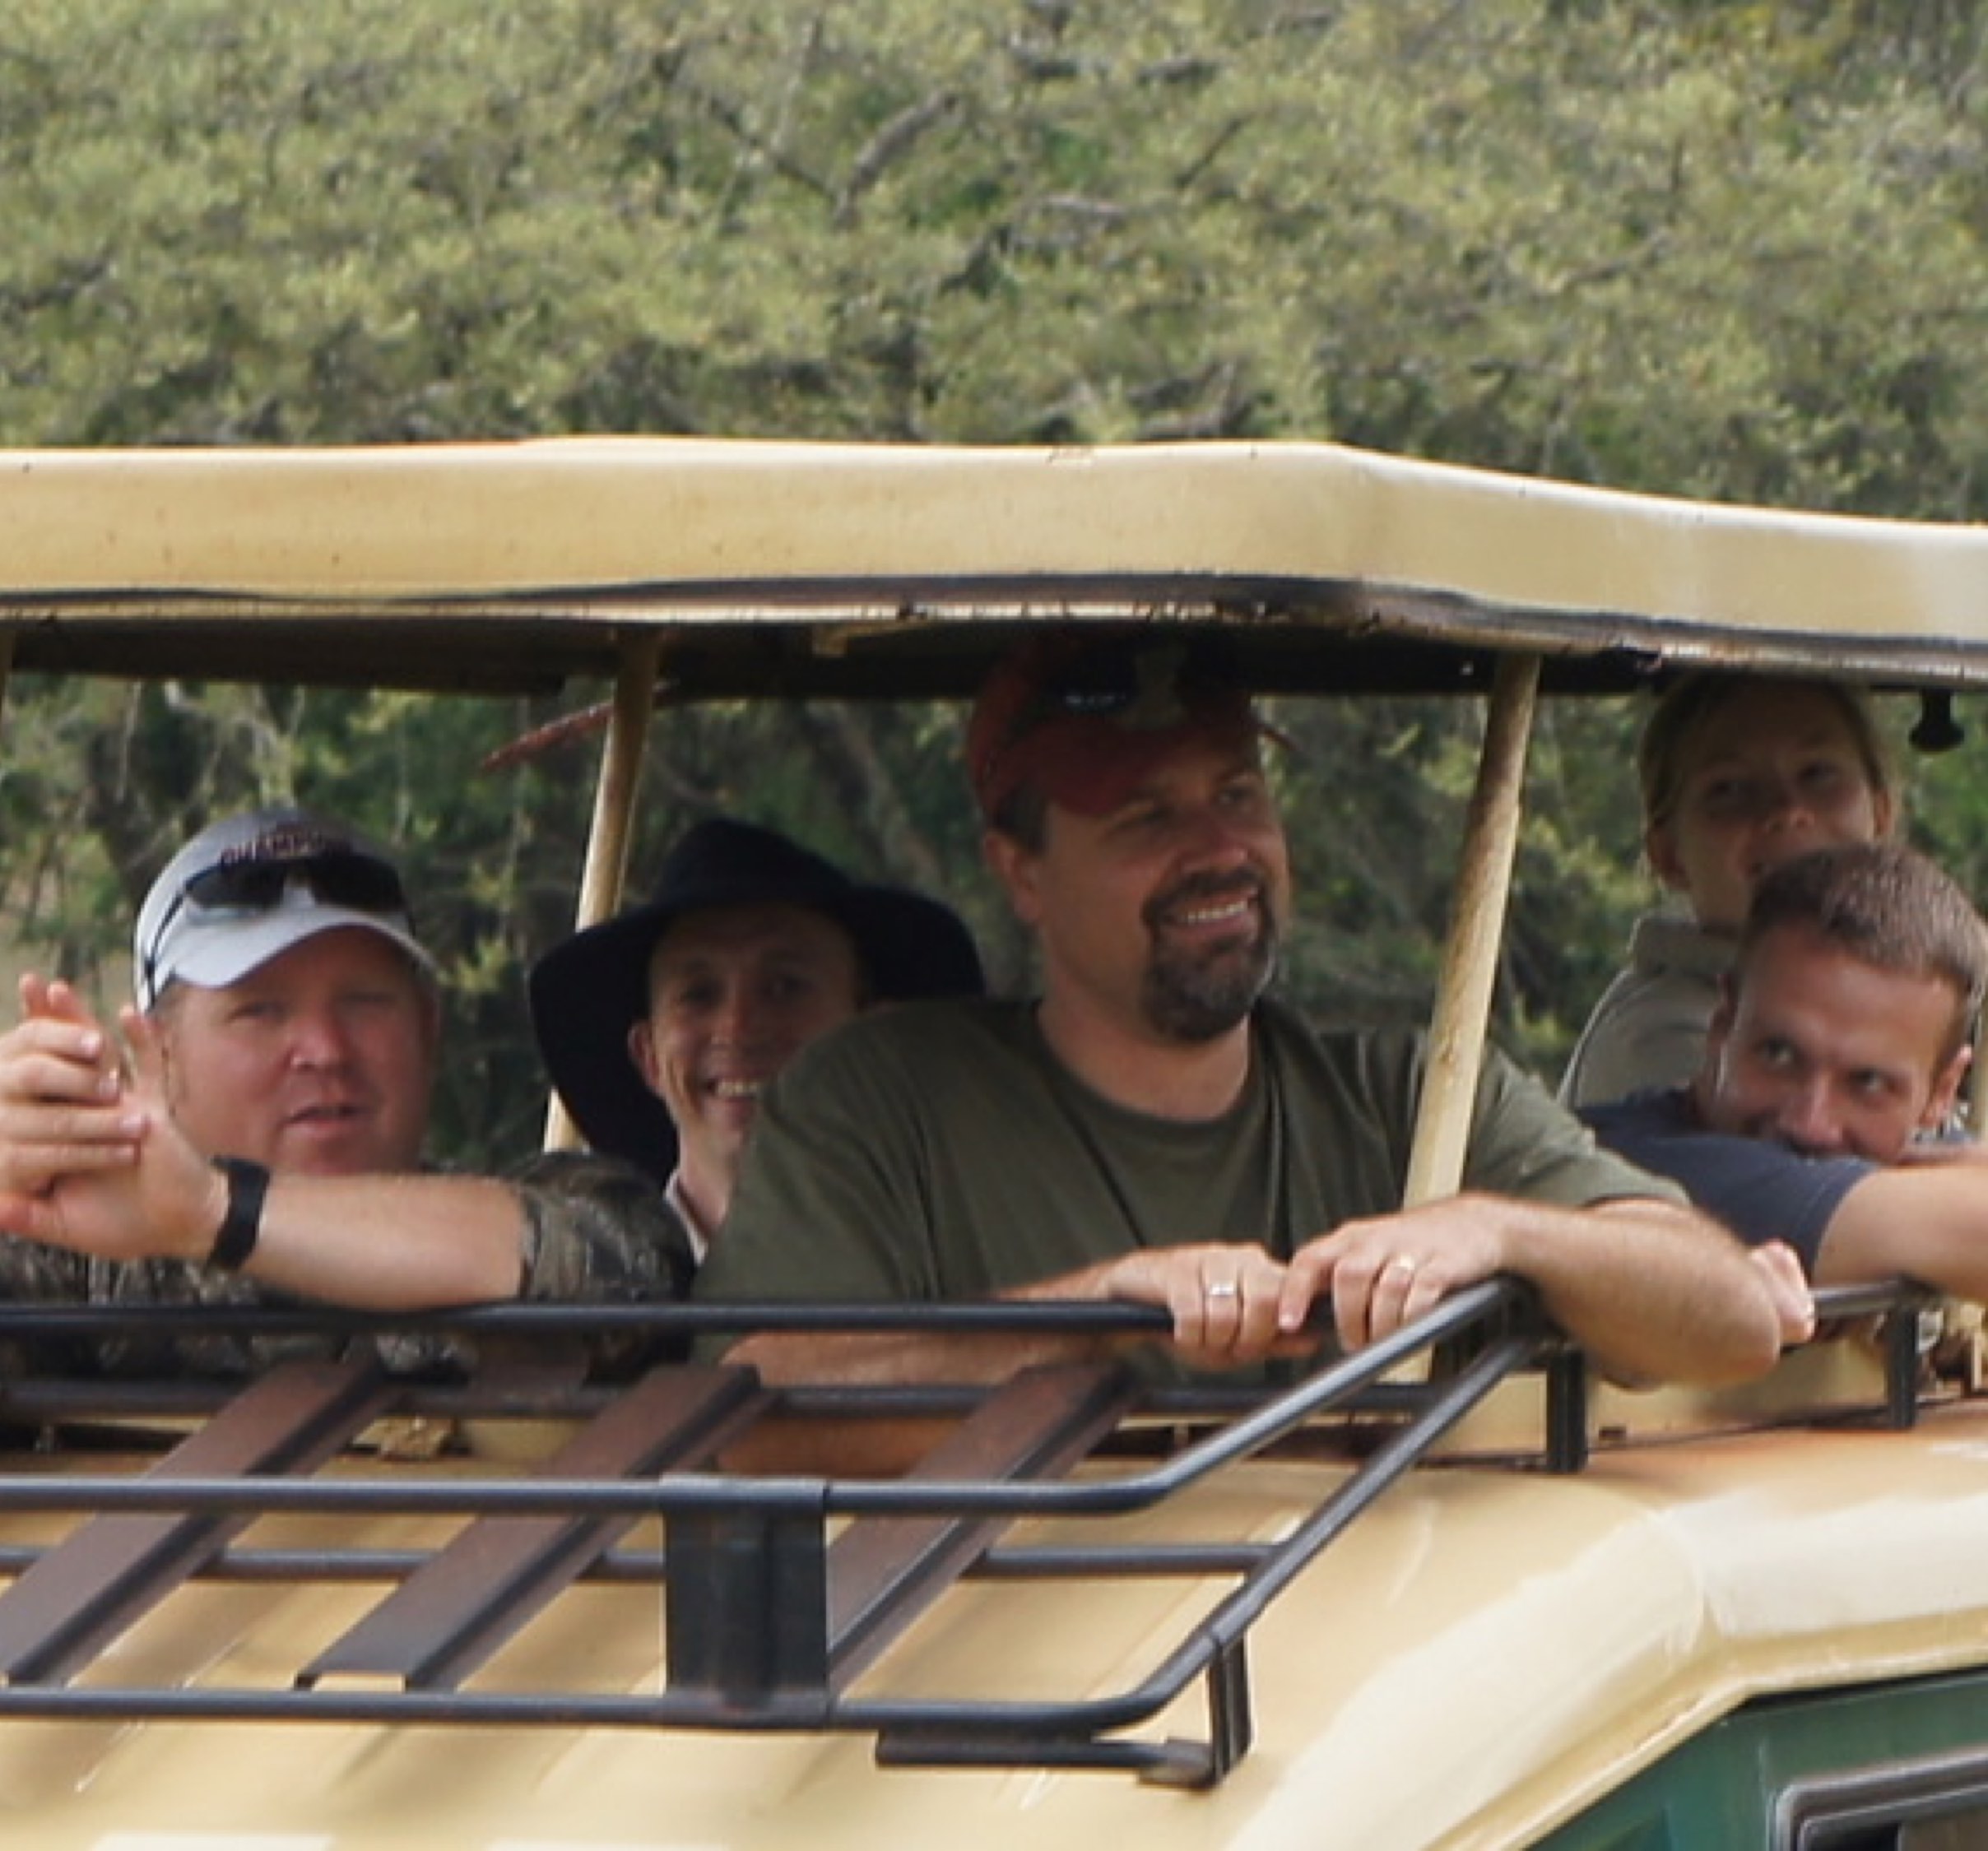 The Safari Way: Roaring Success with the Right Peeps in the Jeep